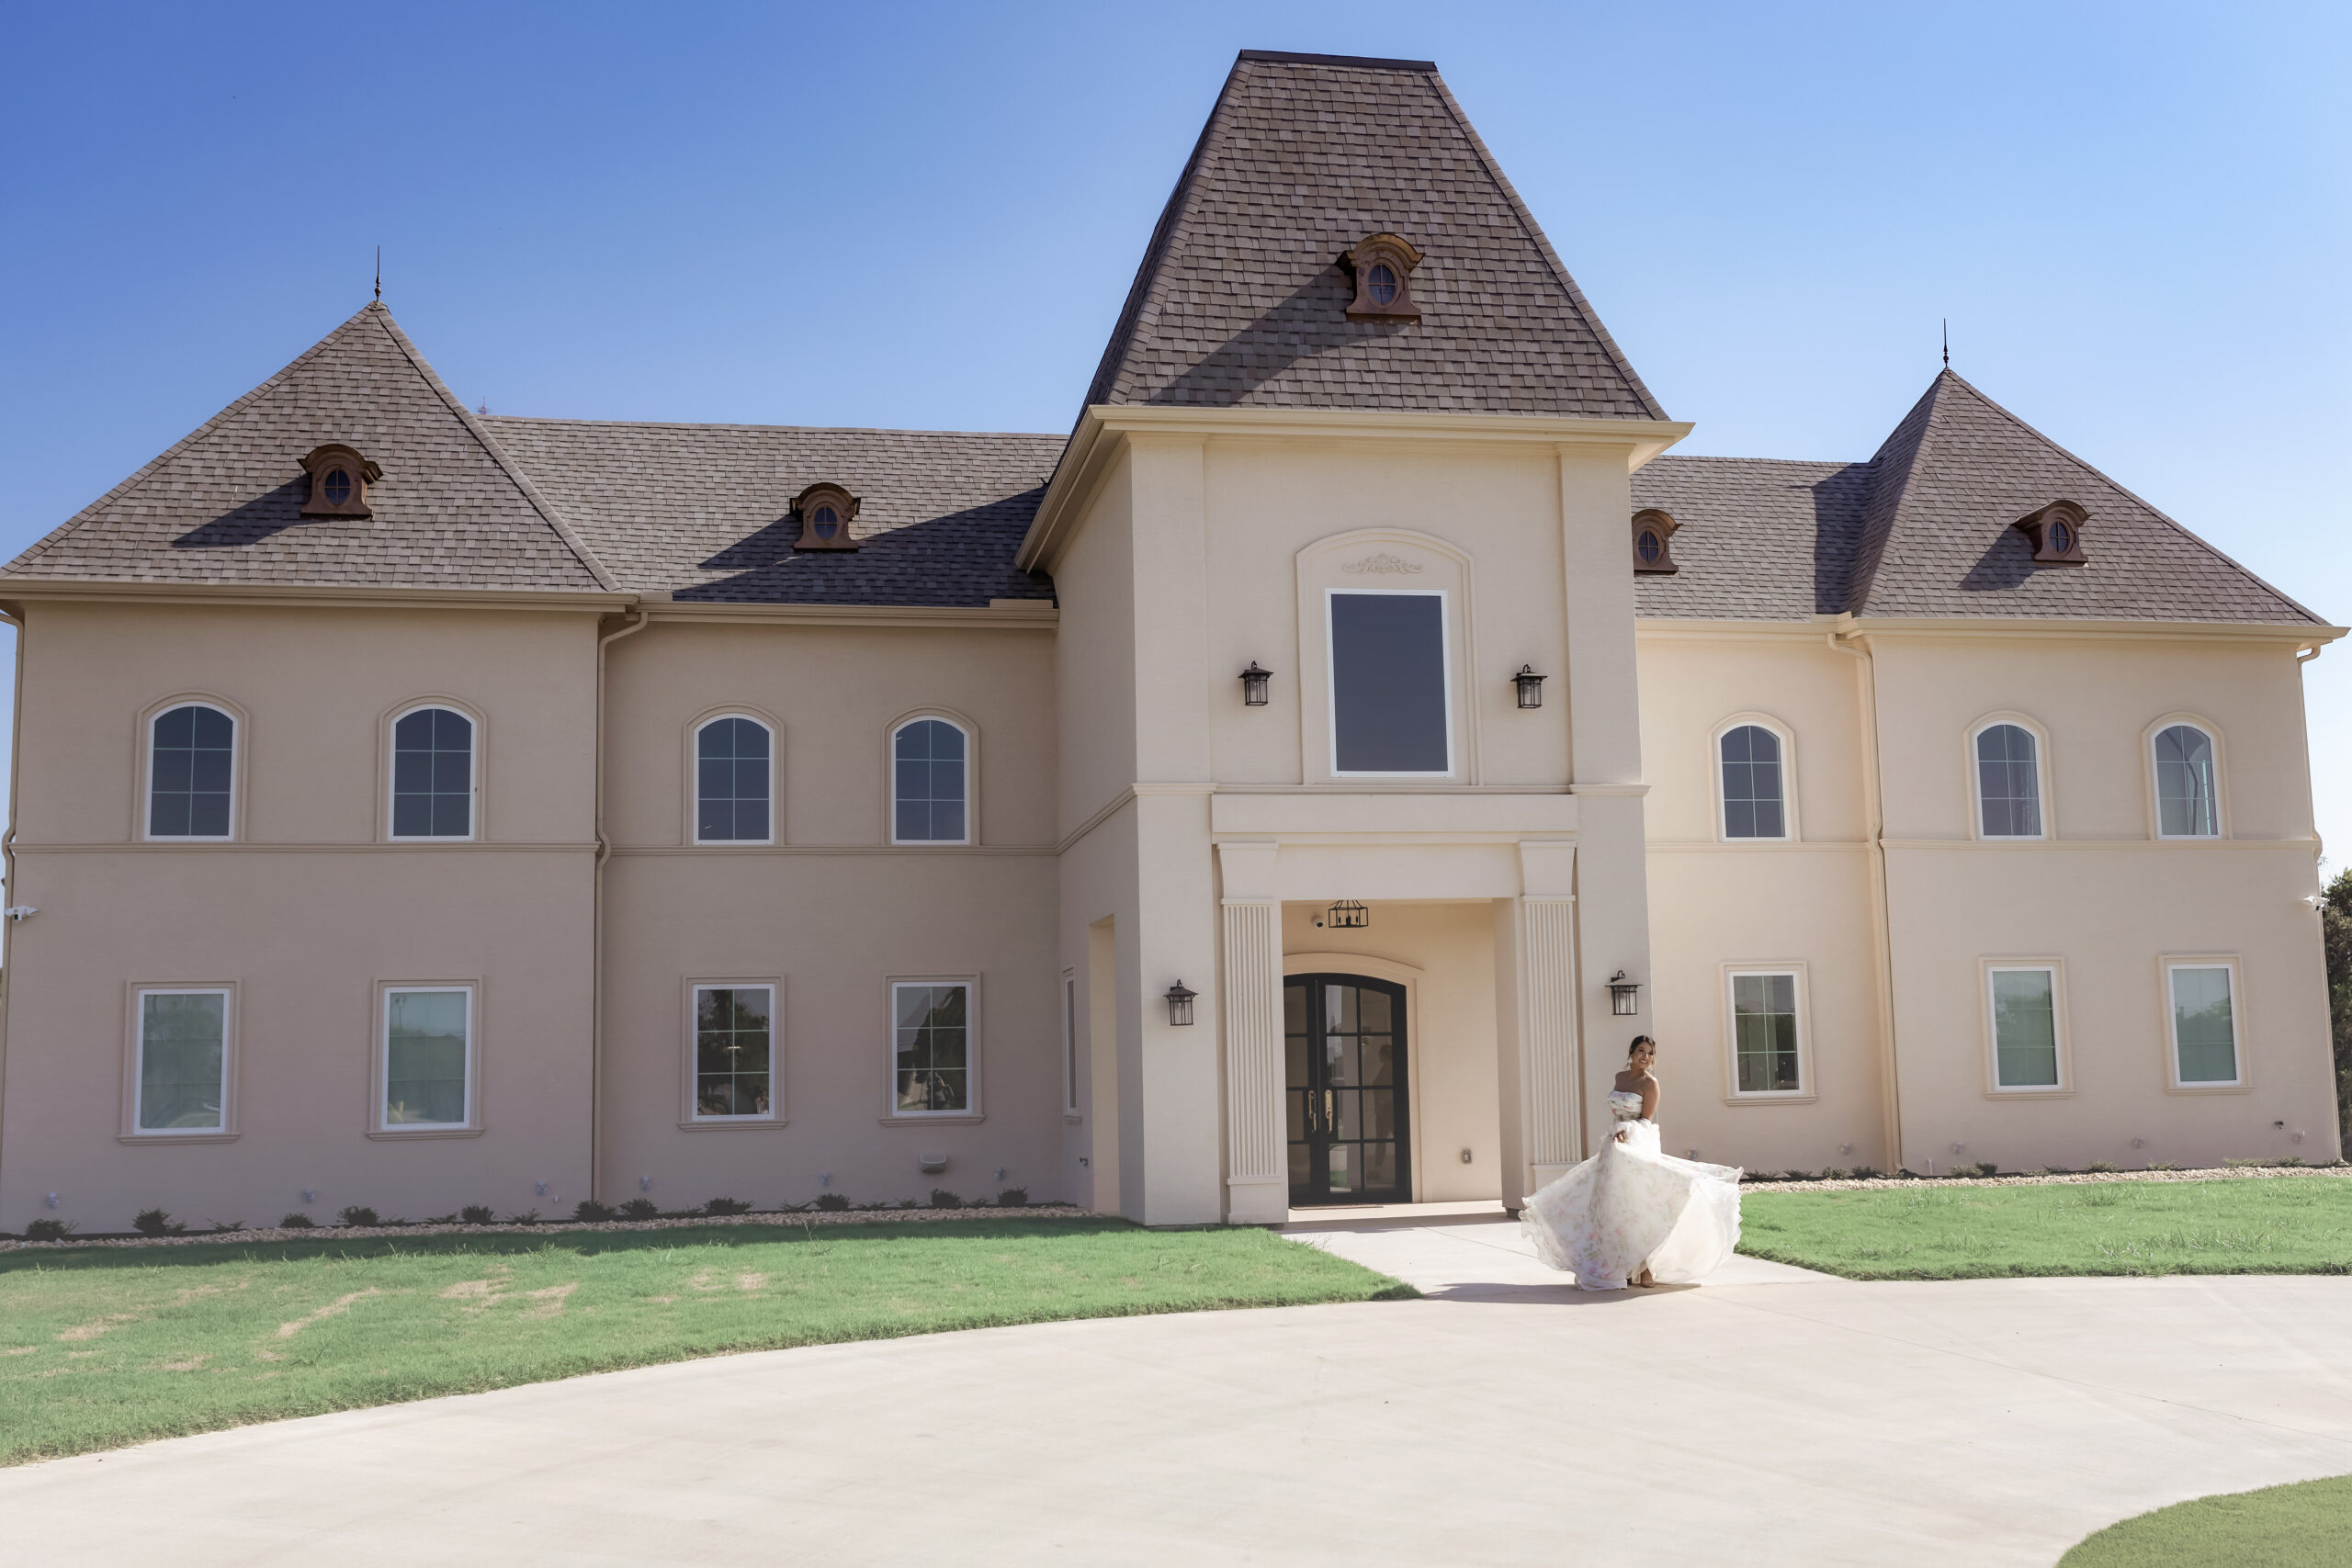 Photograph of Chateau Joli Wedding Venue with Bride out front twirling in her dress